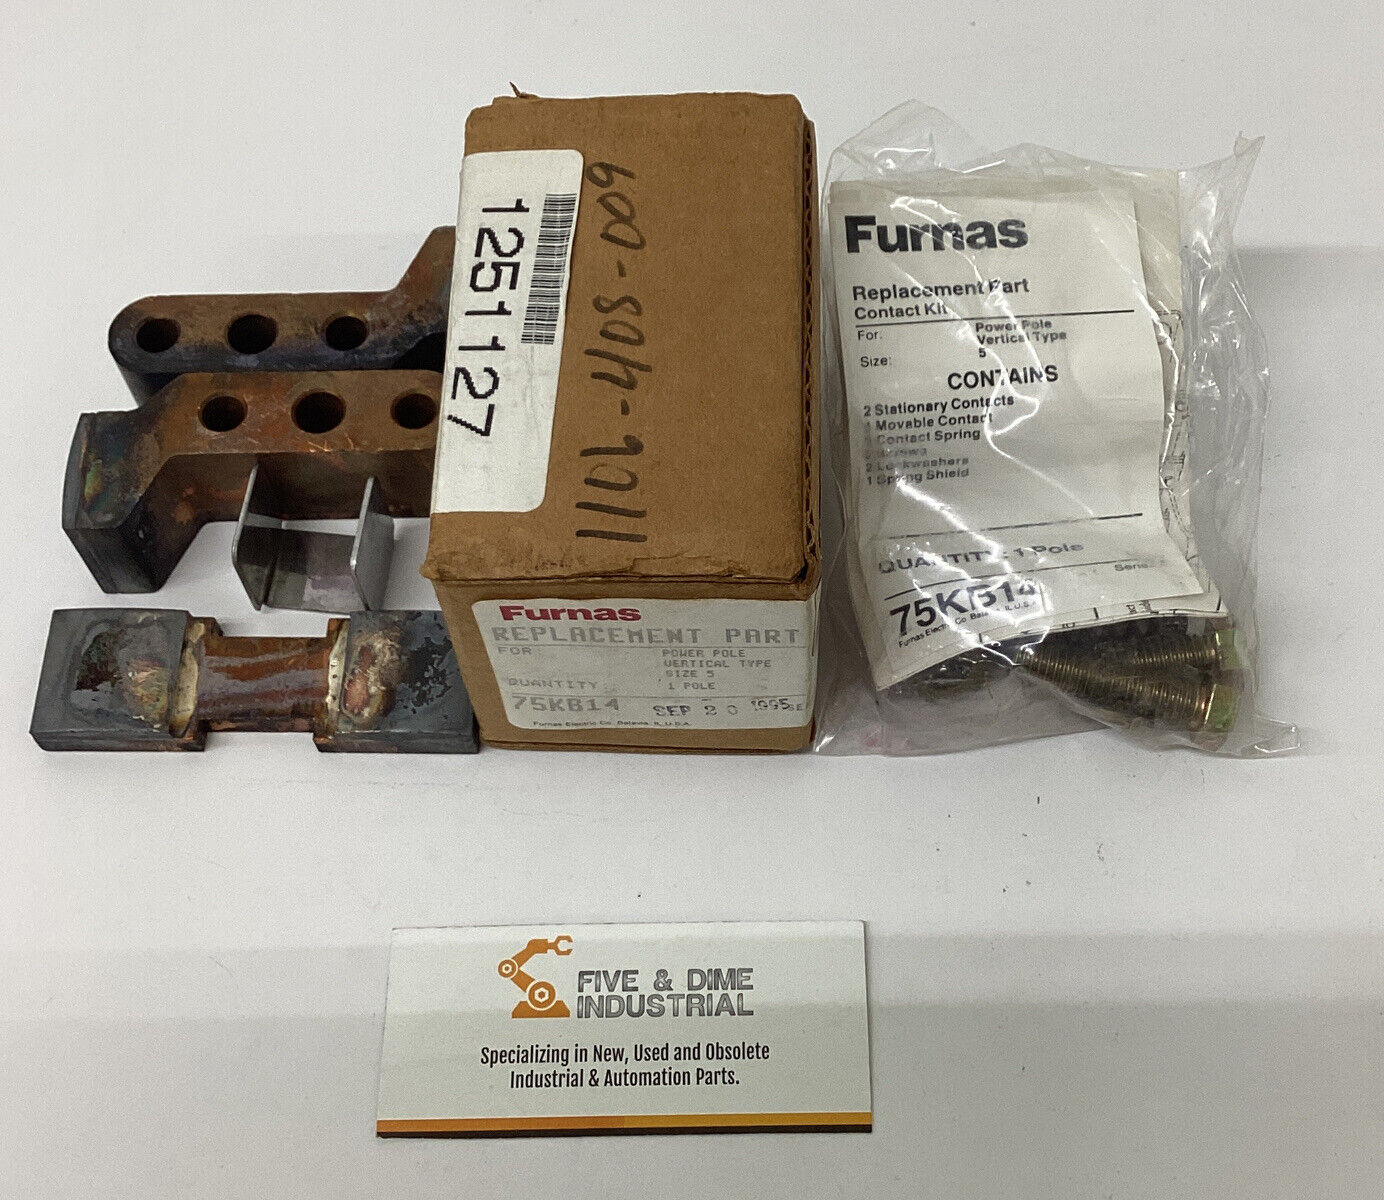 Furnas 75KB14 New Replacement Contact Kit 1-Pole Size 5 Vertical Type (YE263)